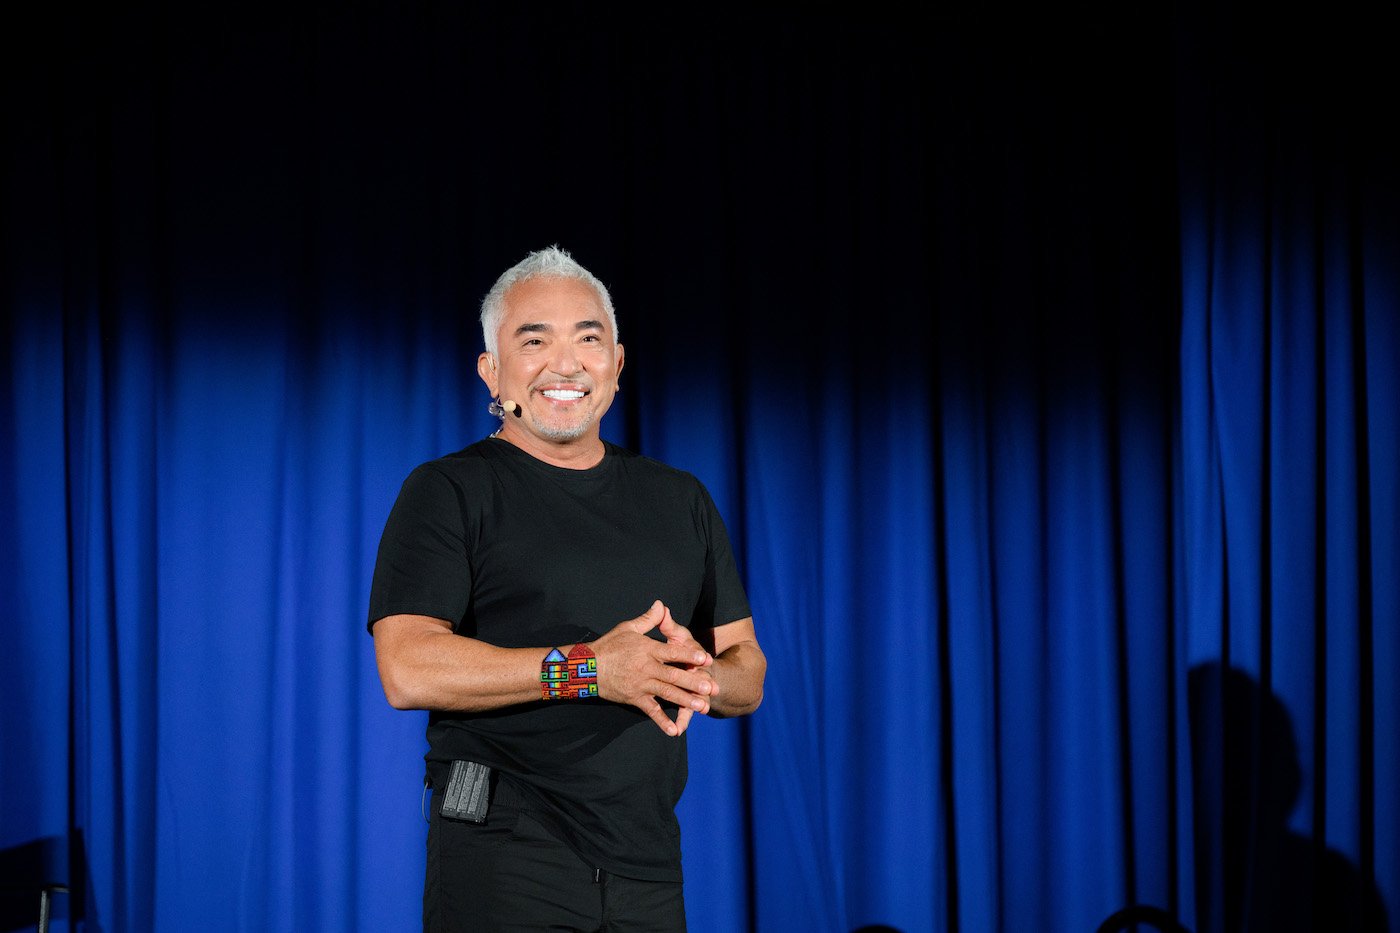 Cesar Millan from 'The Dog Whisperer' on stage at the D23 EXPO 2022 